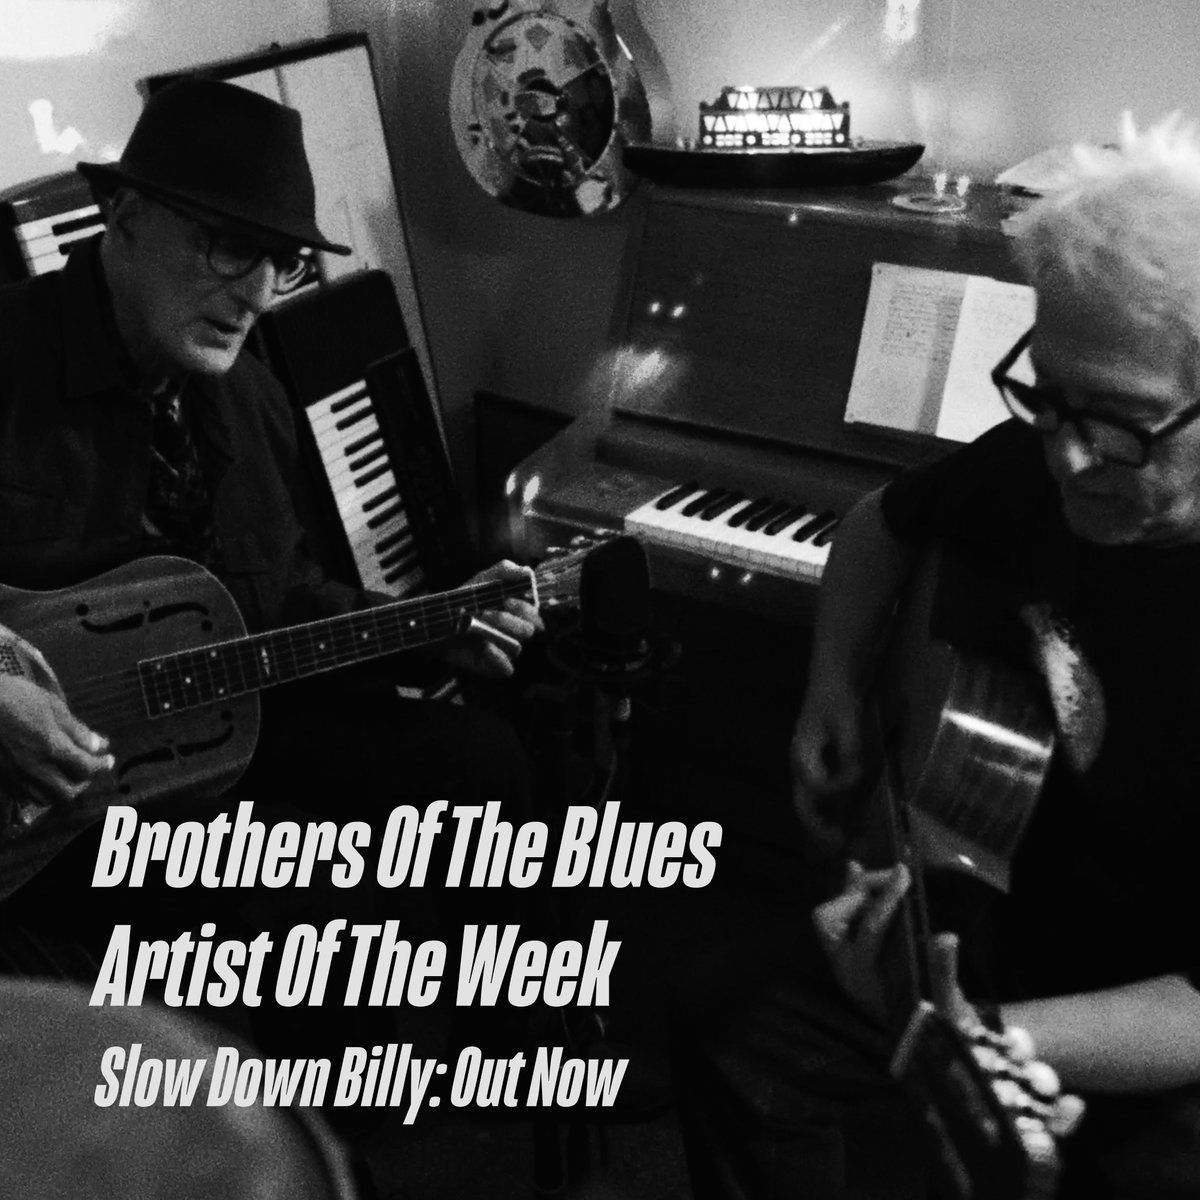 Artist of the week! Take a watch of our new video for #SlowDownBilly via Brothers of the Blues 🔗 brothersoftheblues.com/spotlight